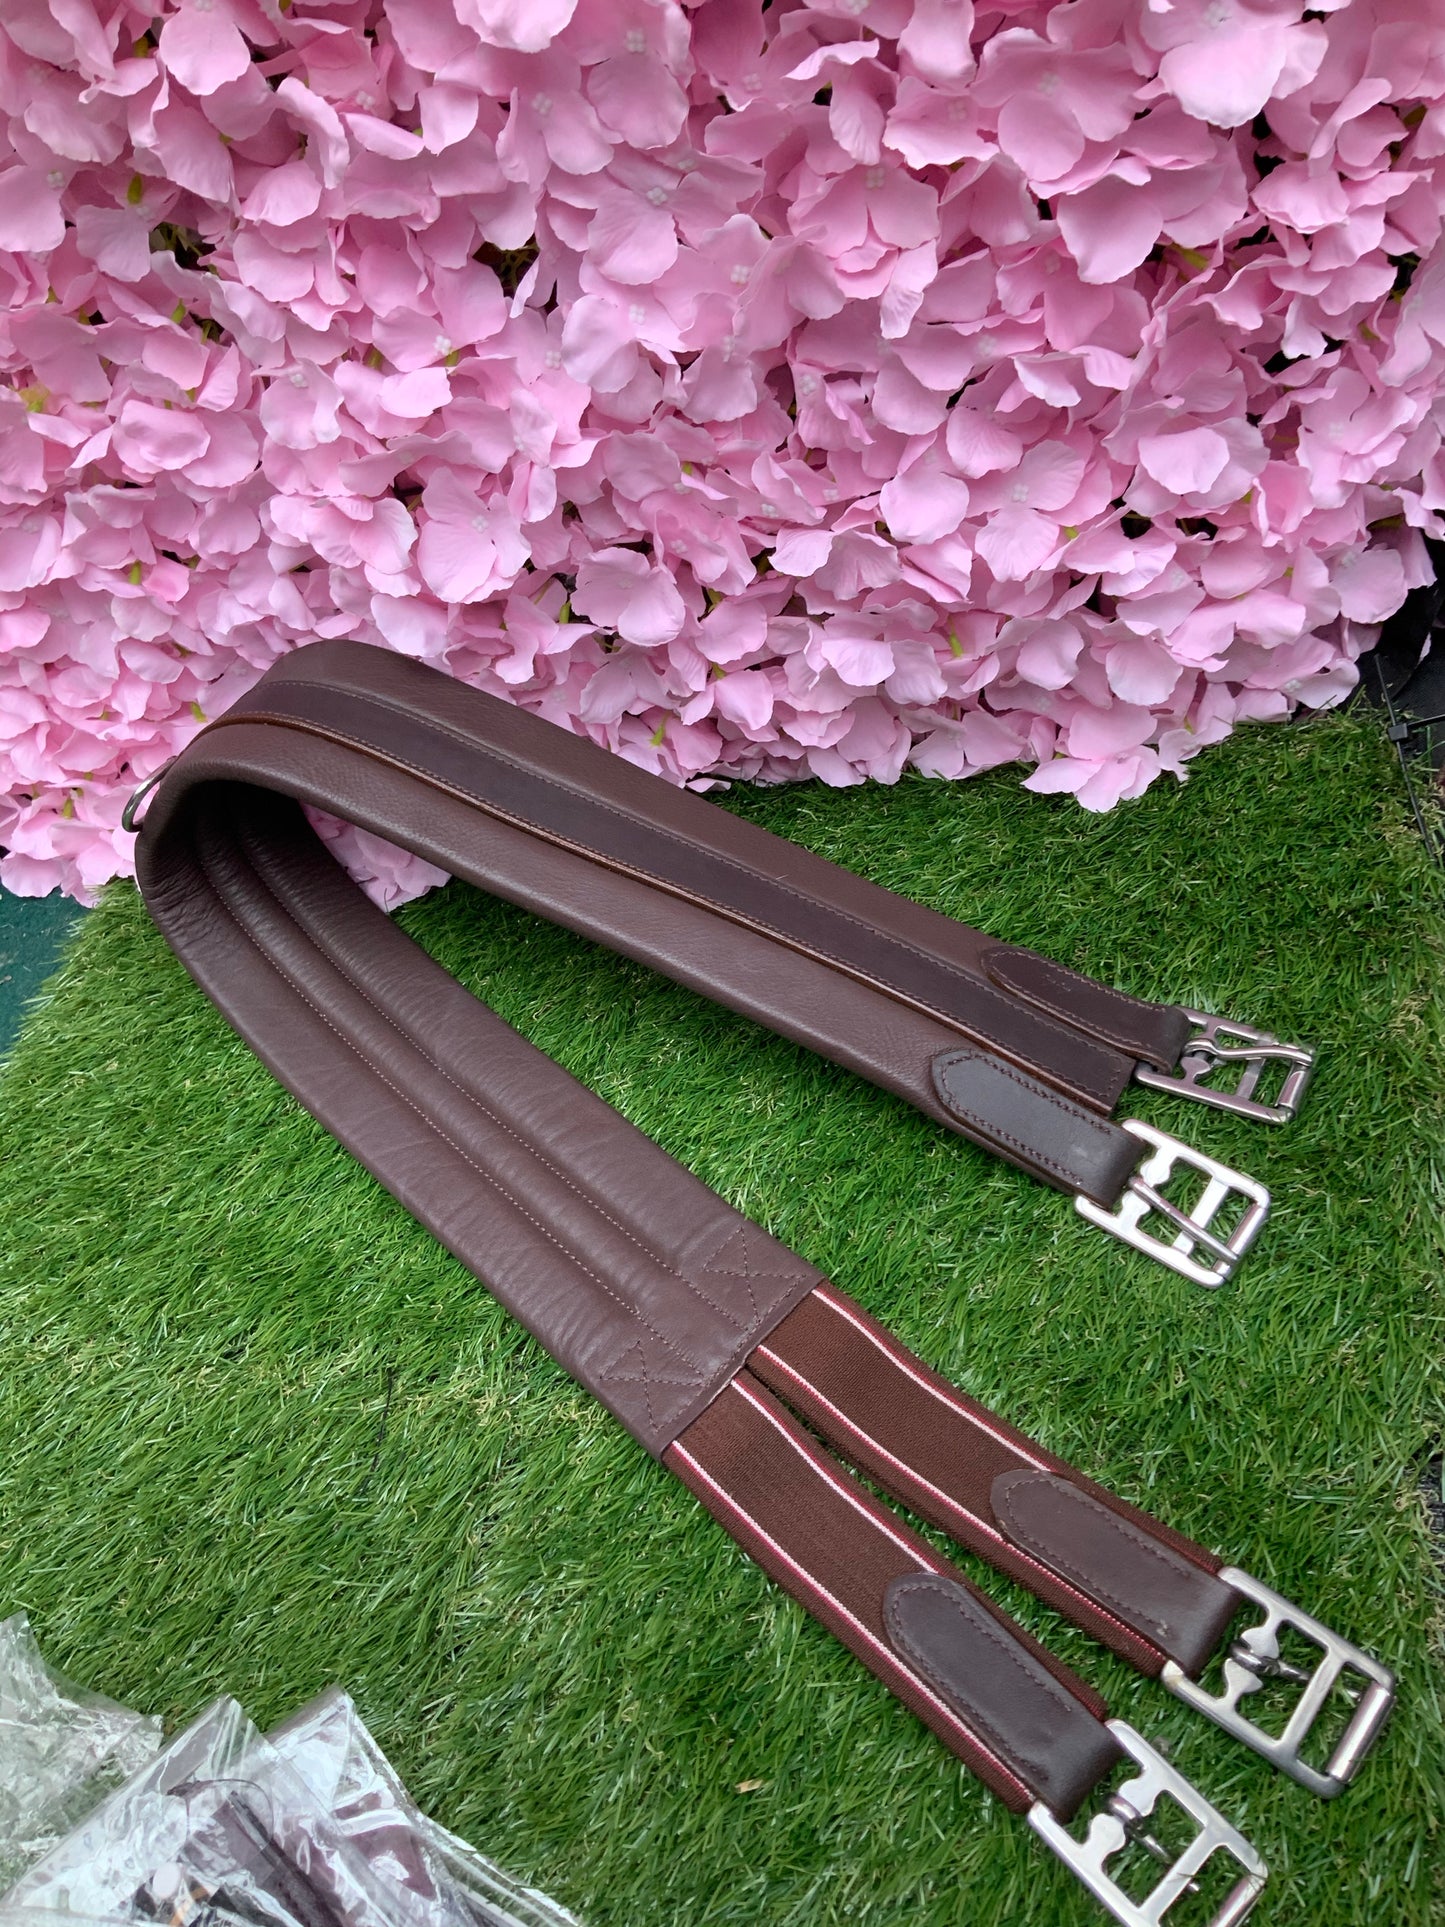 New Wow RANGE Brown leather girth’s in 38”,42”,44”,50”,52”,54”. ❤